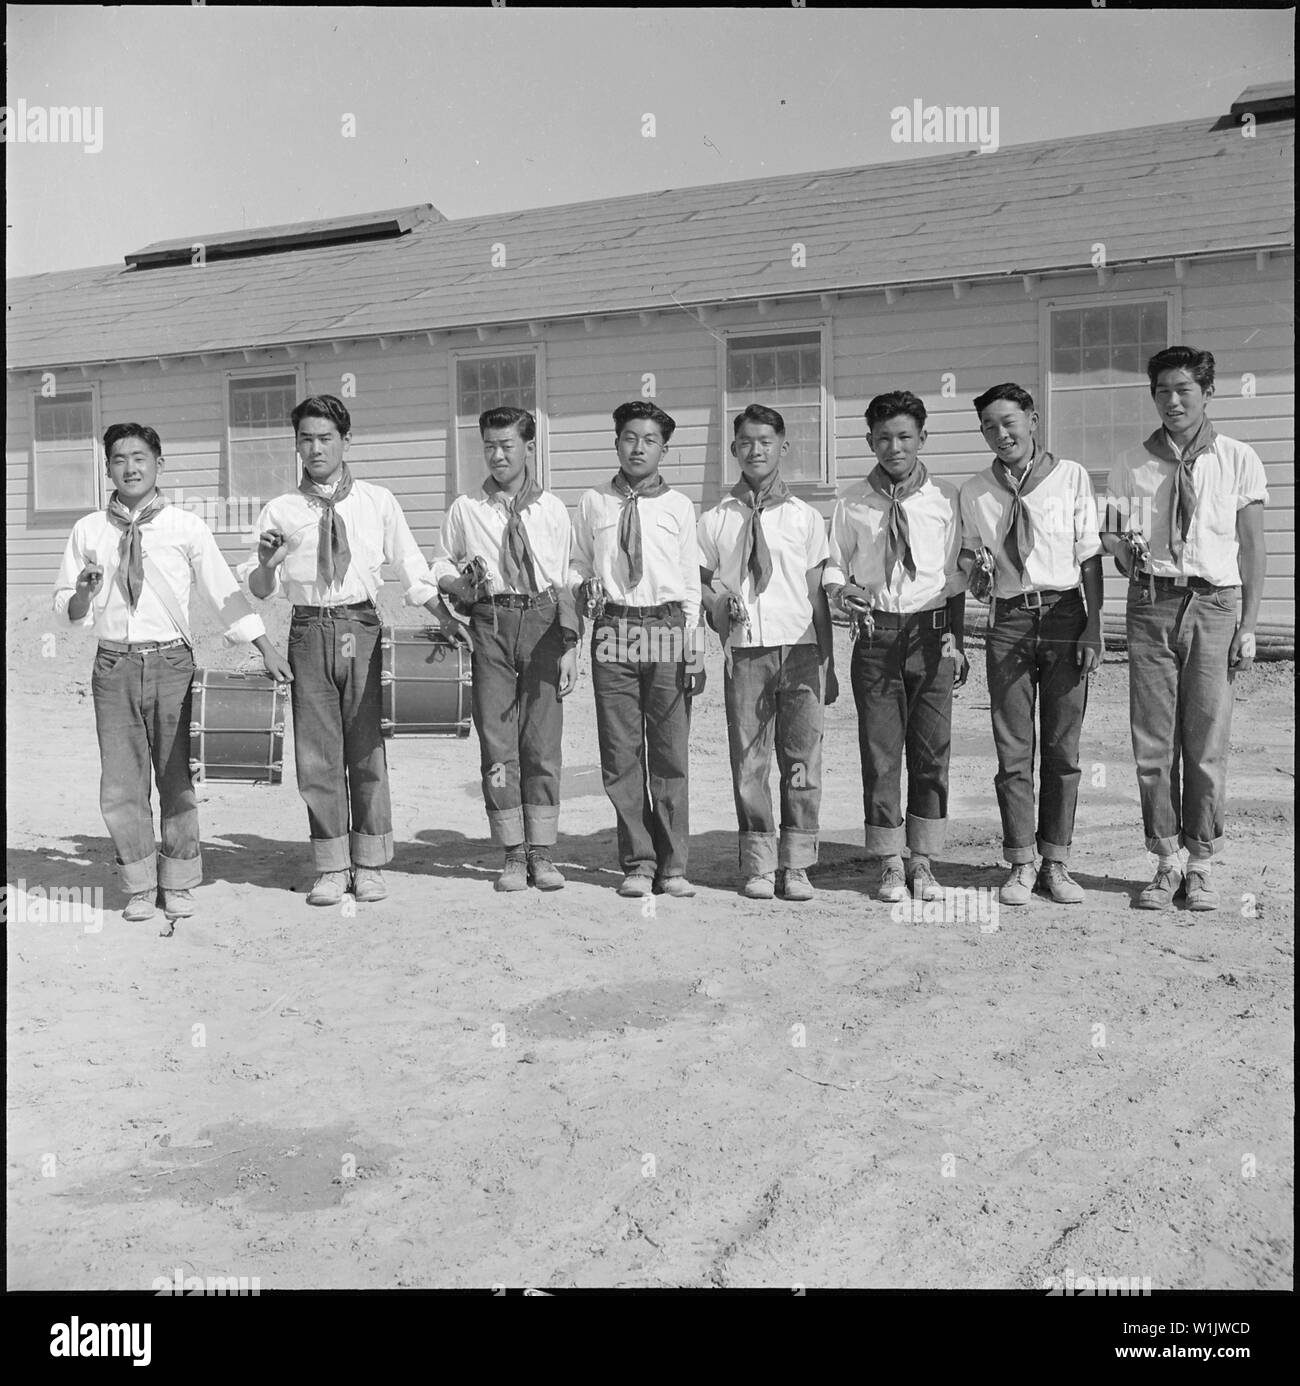 Topaz, Utah. Members of the drum and bugle corp, formerly a boy scout troop at Los Angeles, pose fo . . .; Scope and content:  The full caption for this photograph reads: Topaz, Utah. Members of the drum and bugle corp, formerly a boy scout troop at Los Angeles, pose for their photograph at the Topaz Relocation Center. Stock Photo